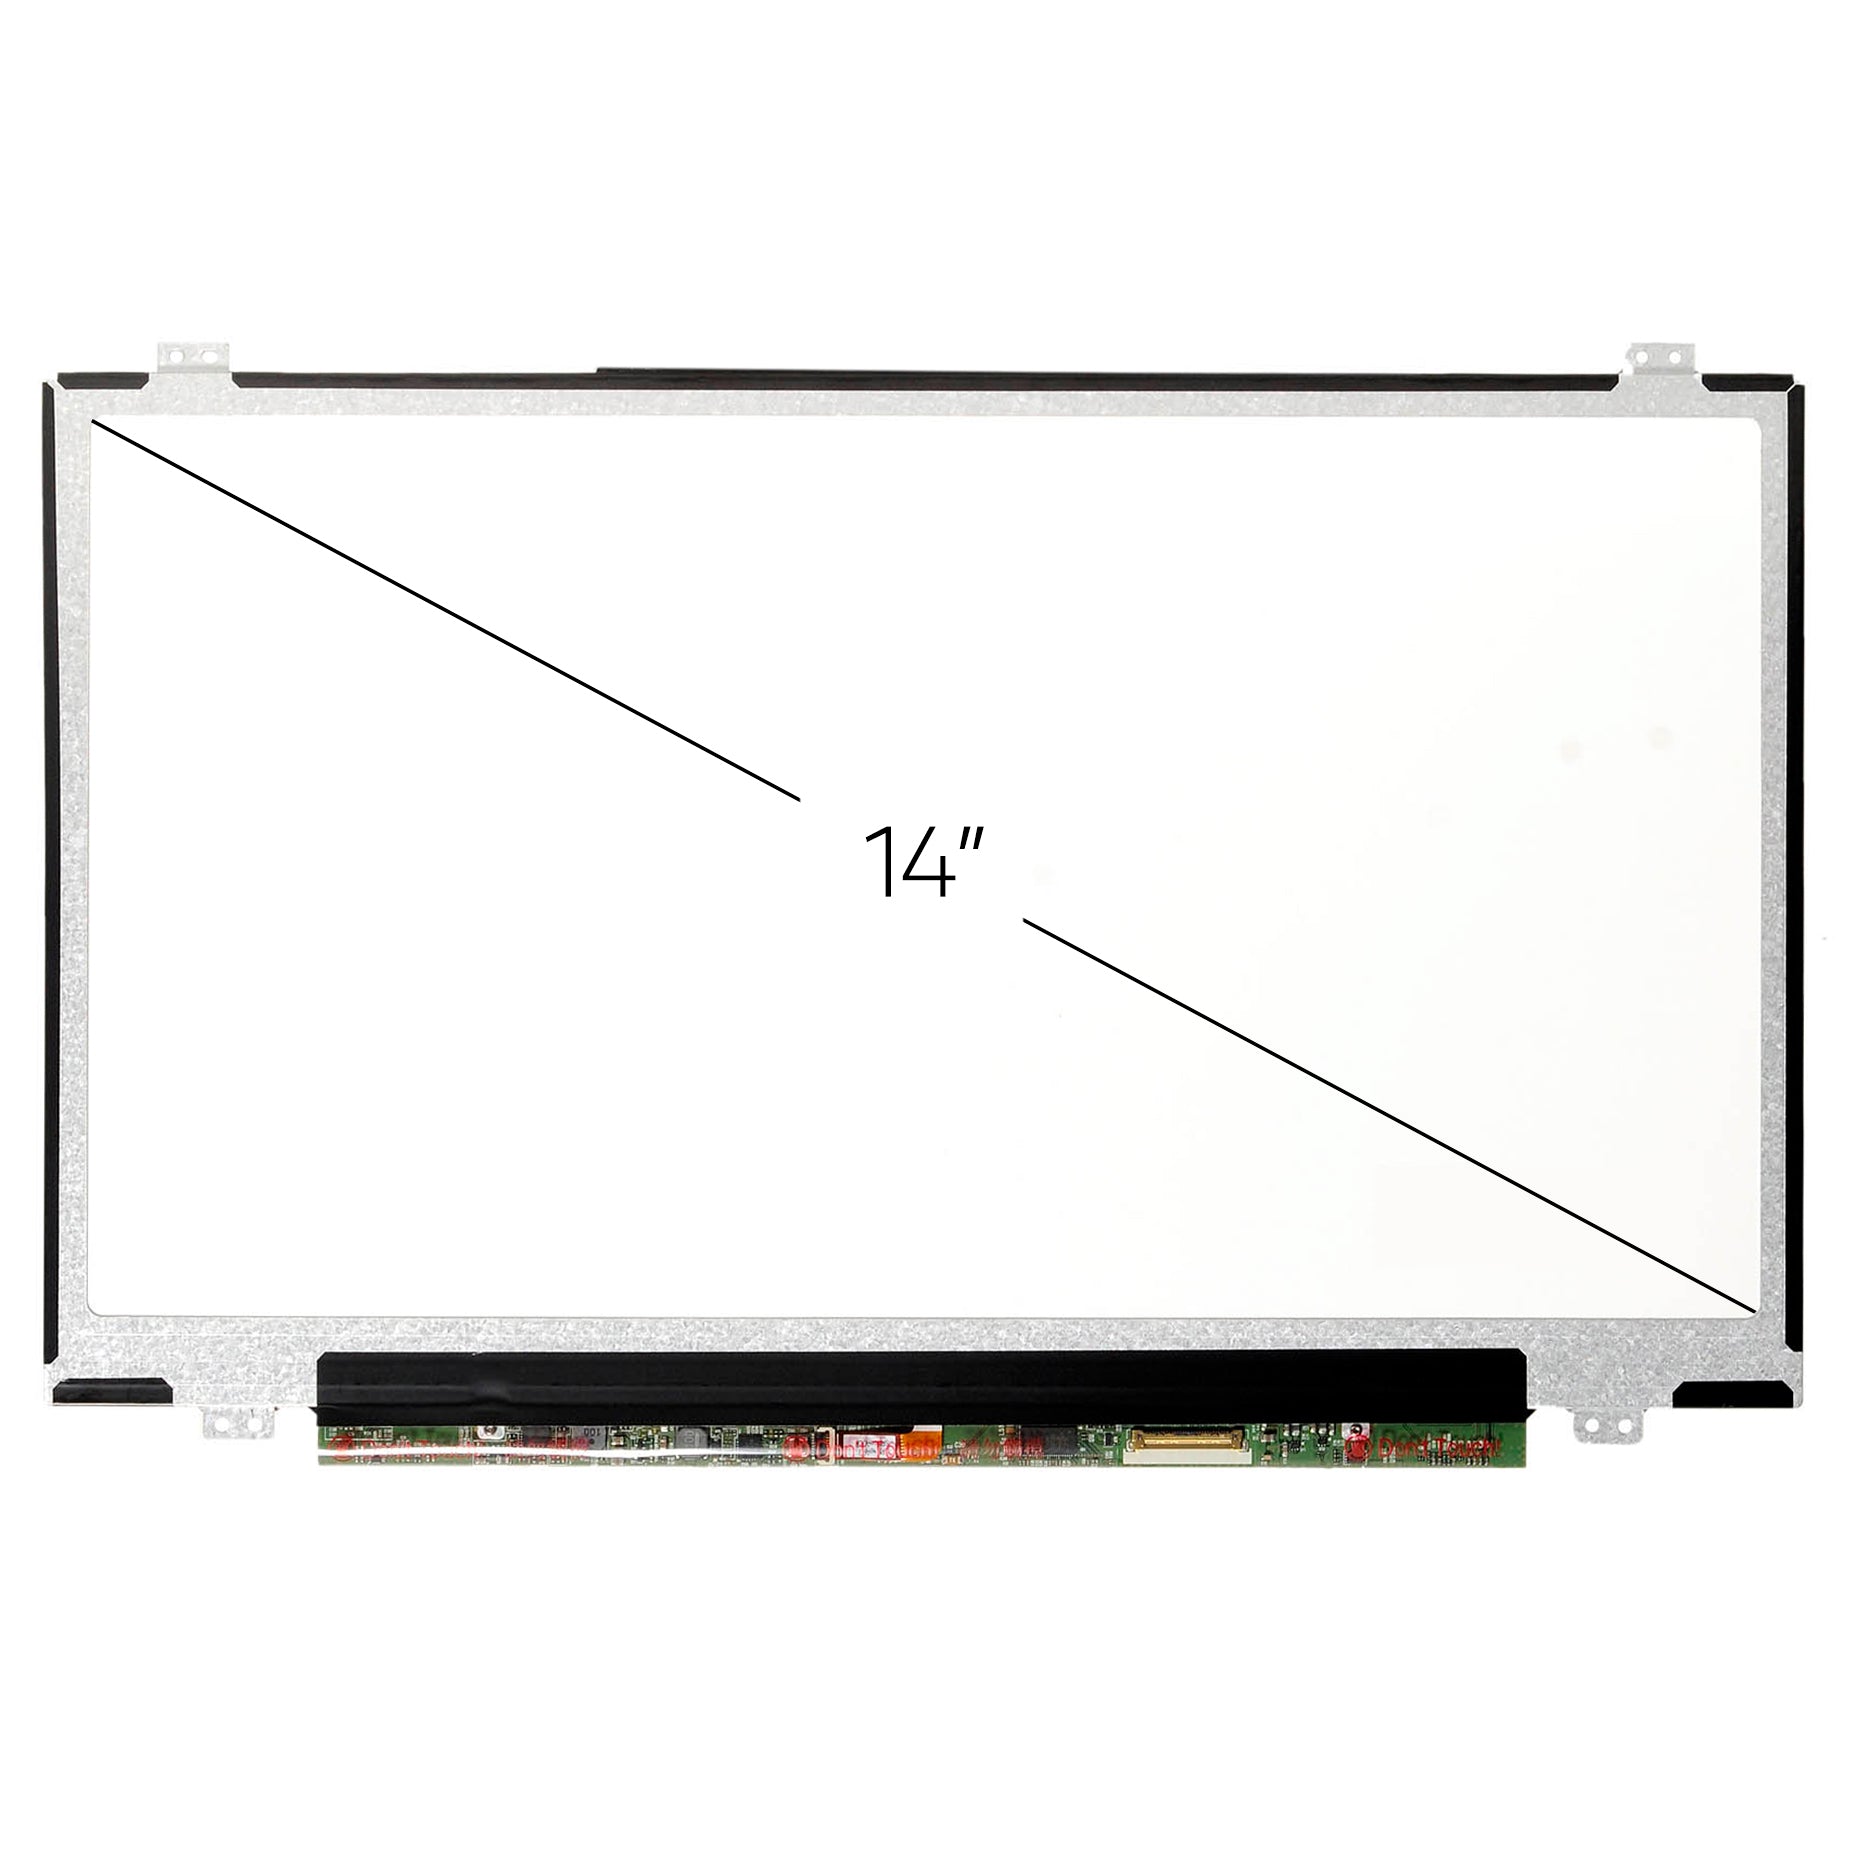 Screen Replacement for HP Elitebook 840 G2 FHD 1920x1080 IPS Matte LCD LED Display